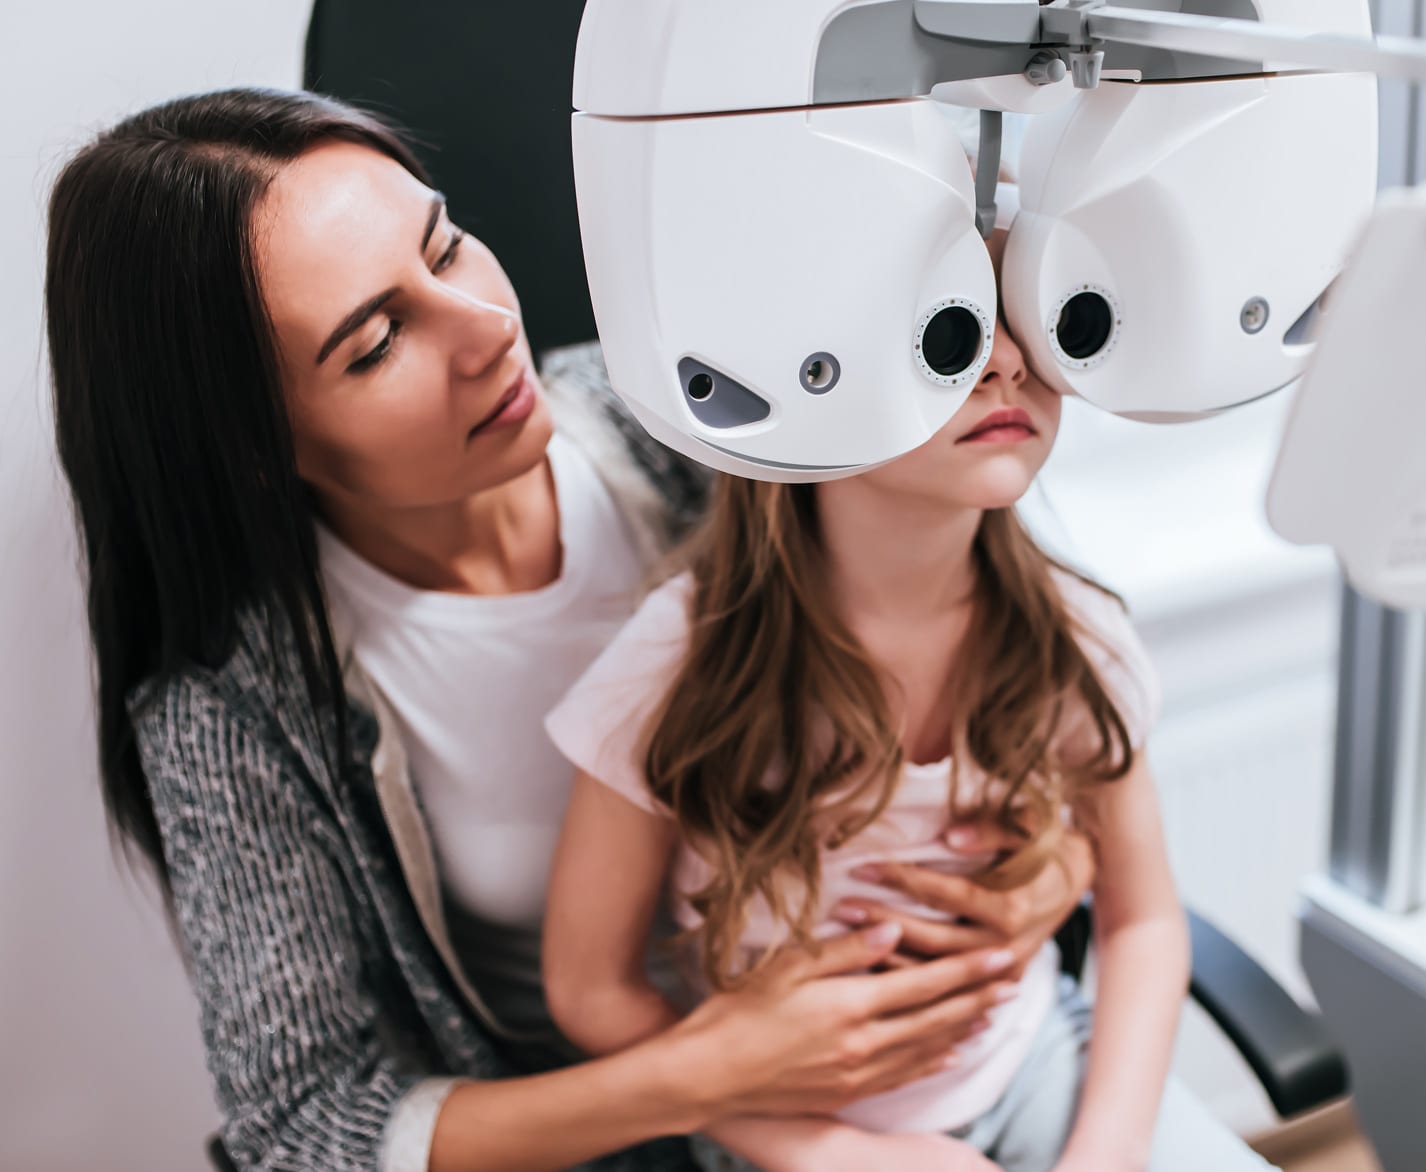 eye exams for children: what parents need to know